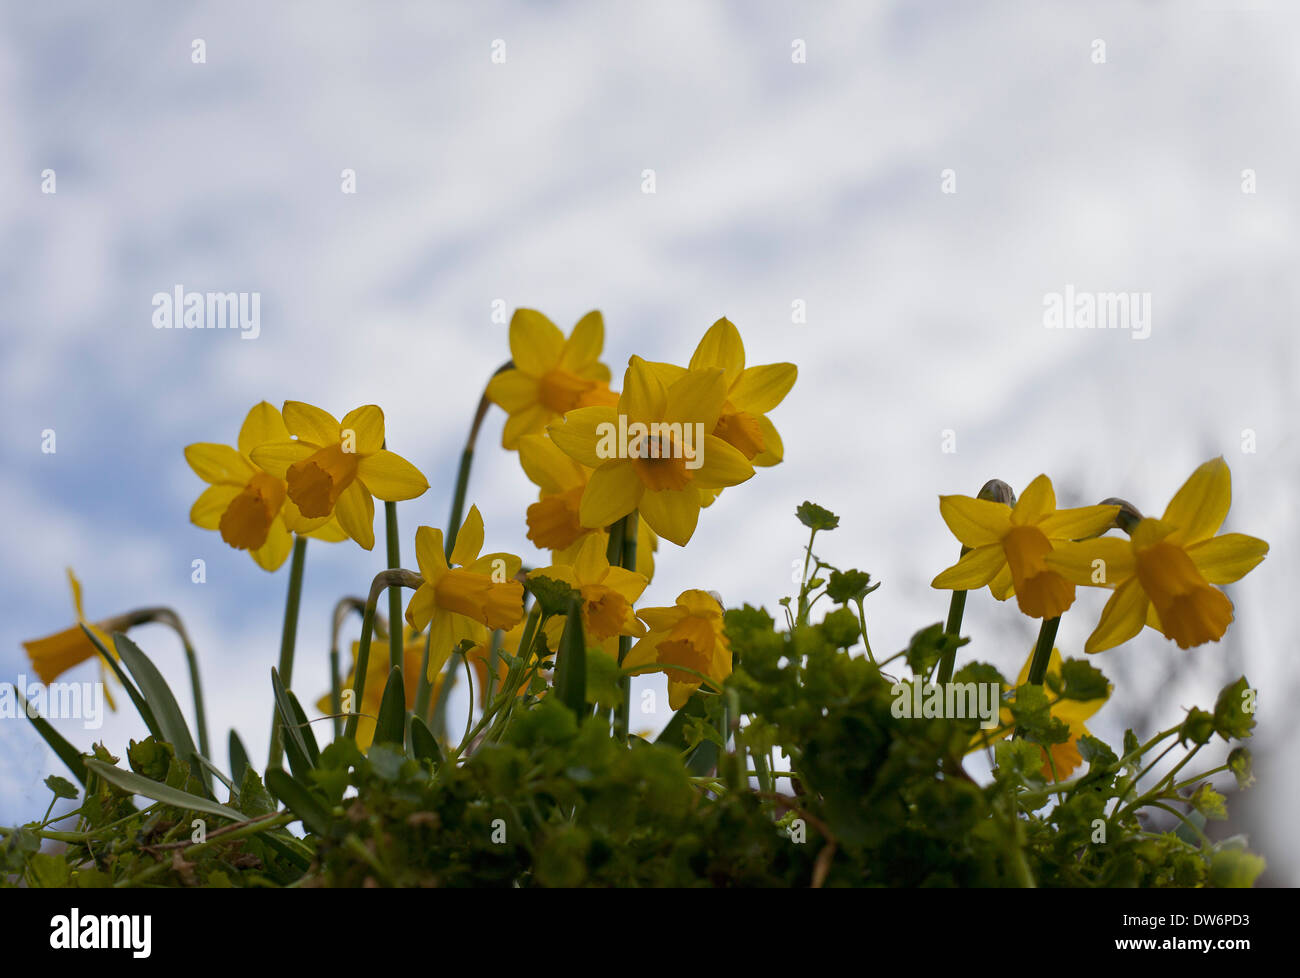 daffodil flowers with sky behind Stock Photo